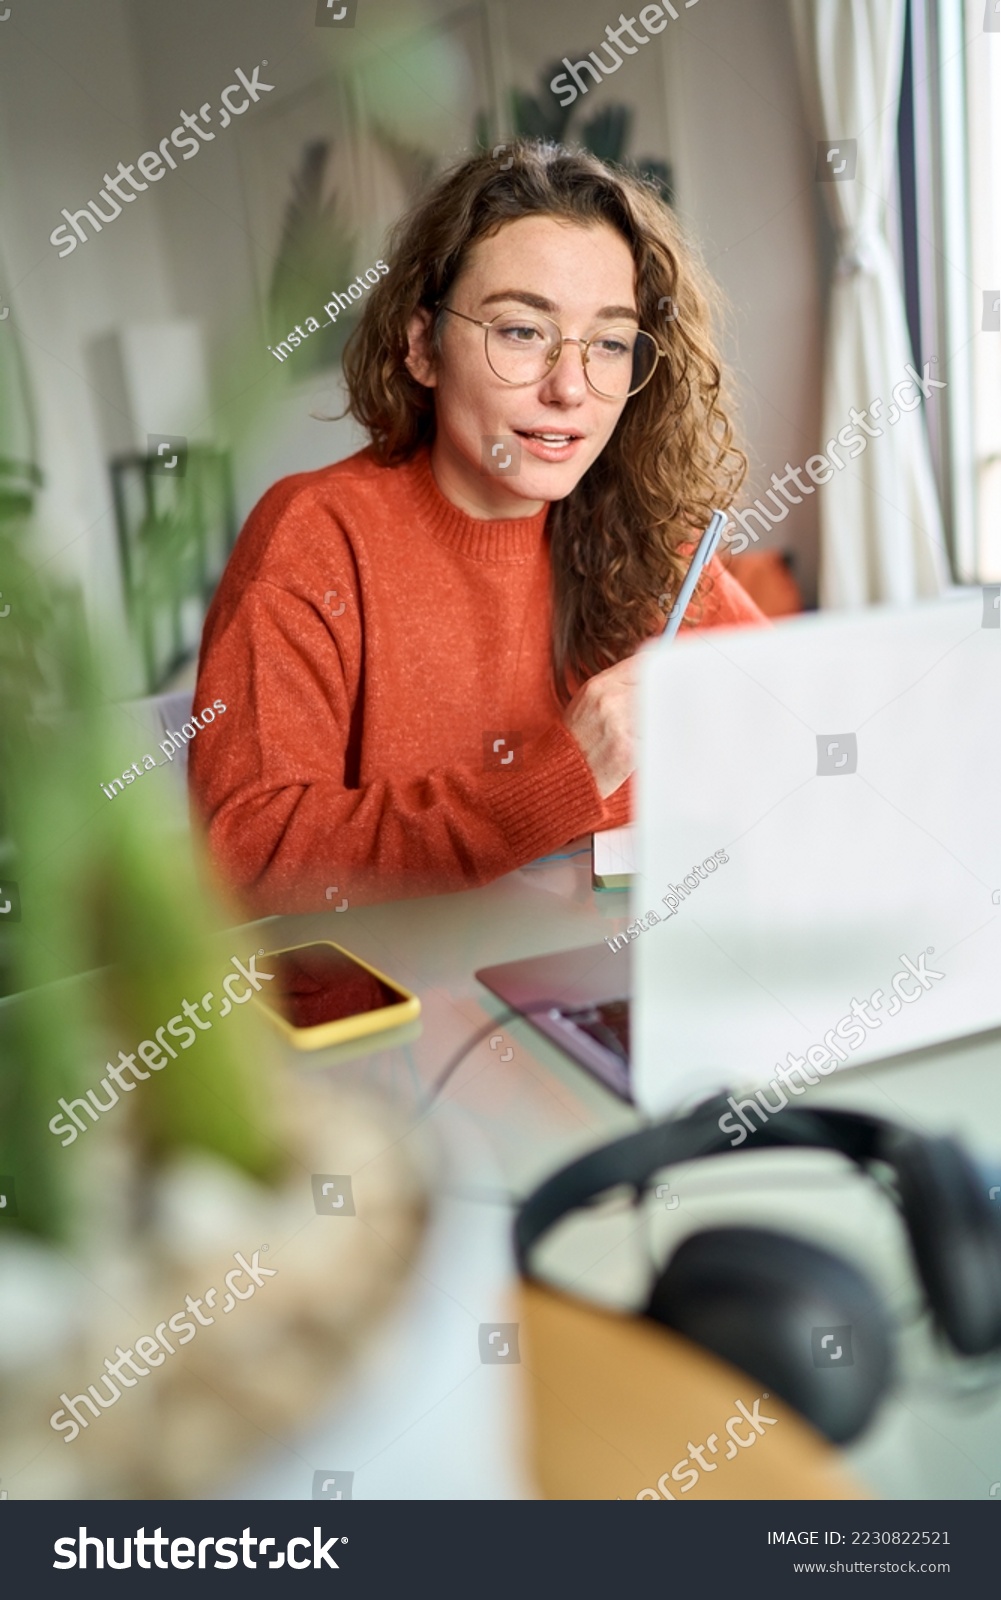 Young woman, female student or worker using laptop elearning or remote working at home office looking at computer watching webinar or having virtual meeting communicating by video call. Vertical. #2230822521